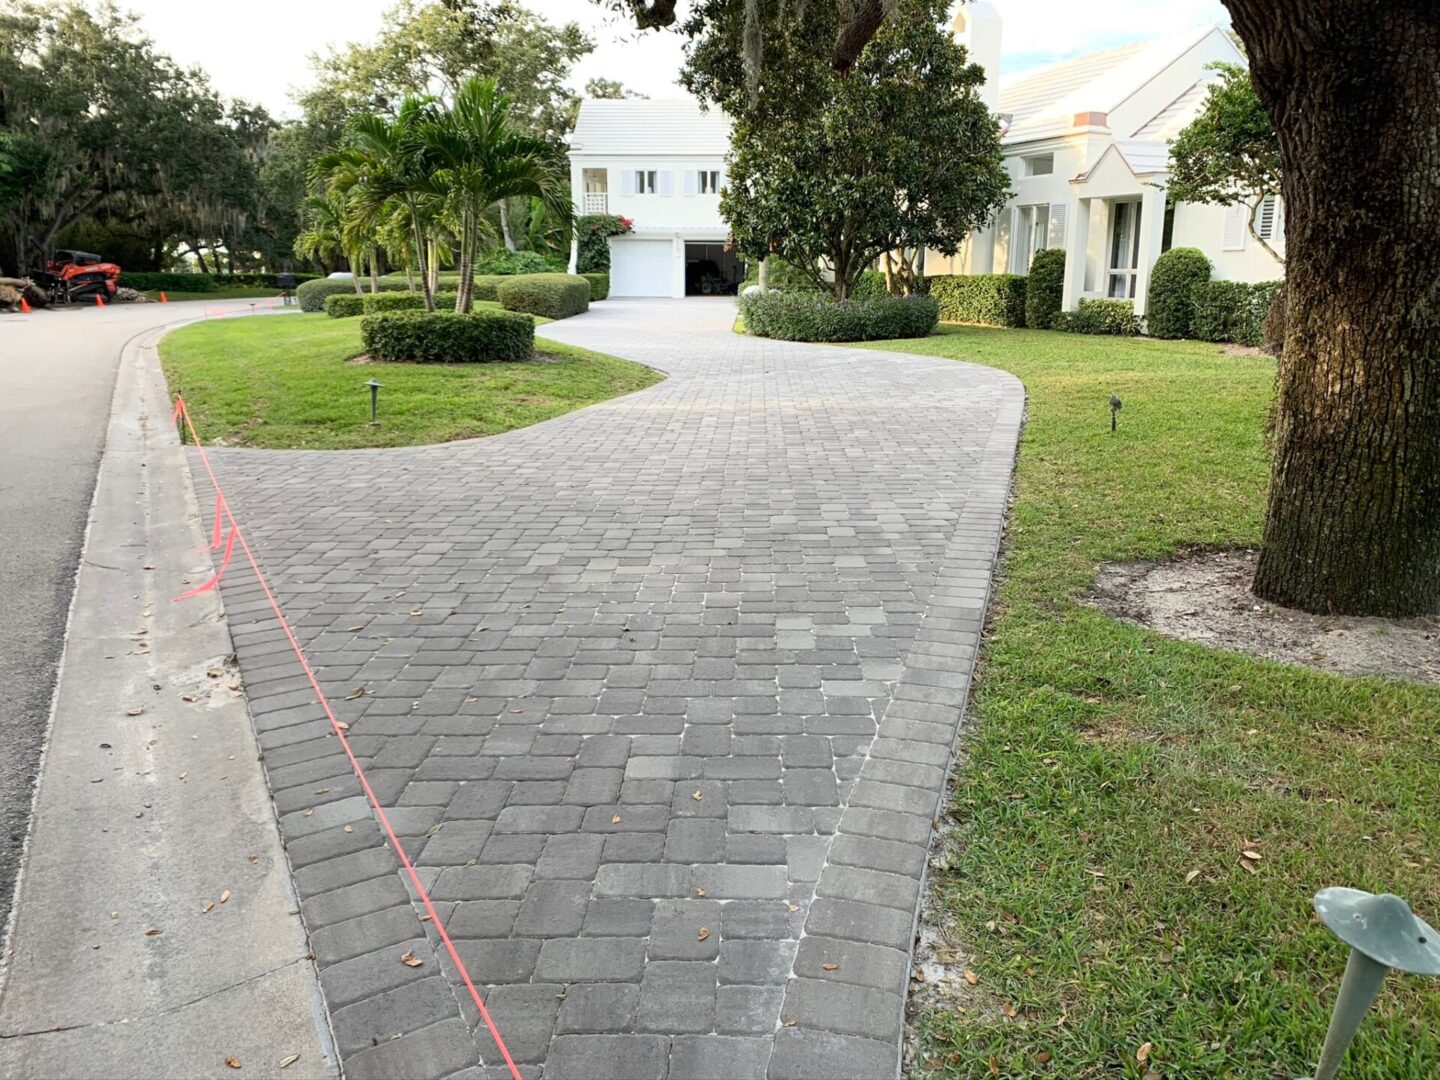 A wide brick-paved driveway leads to a garage and is bordered by a manicured lawn and shrubbery. Red tape is strung along one side, possibly indicating construction or maintenance work.